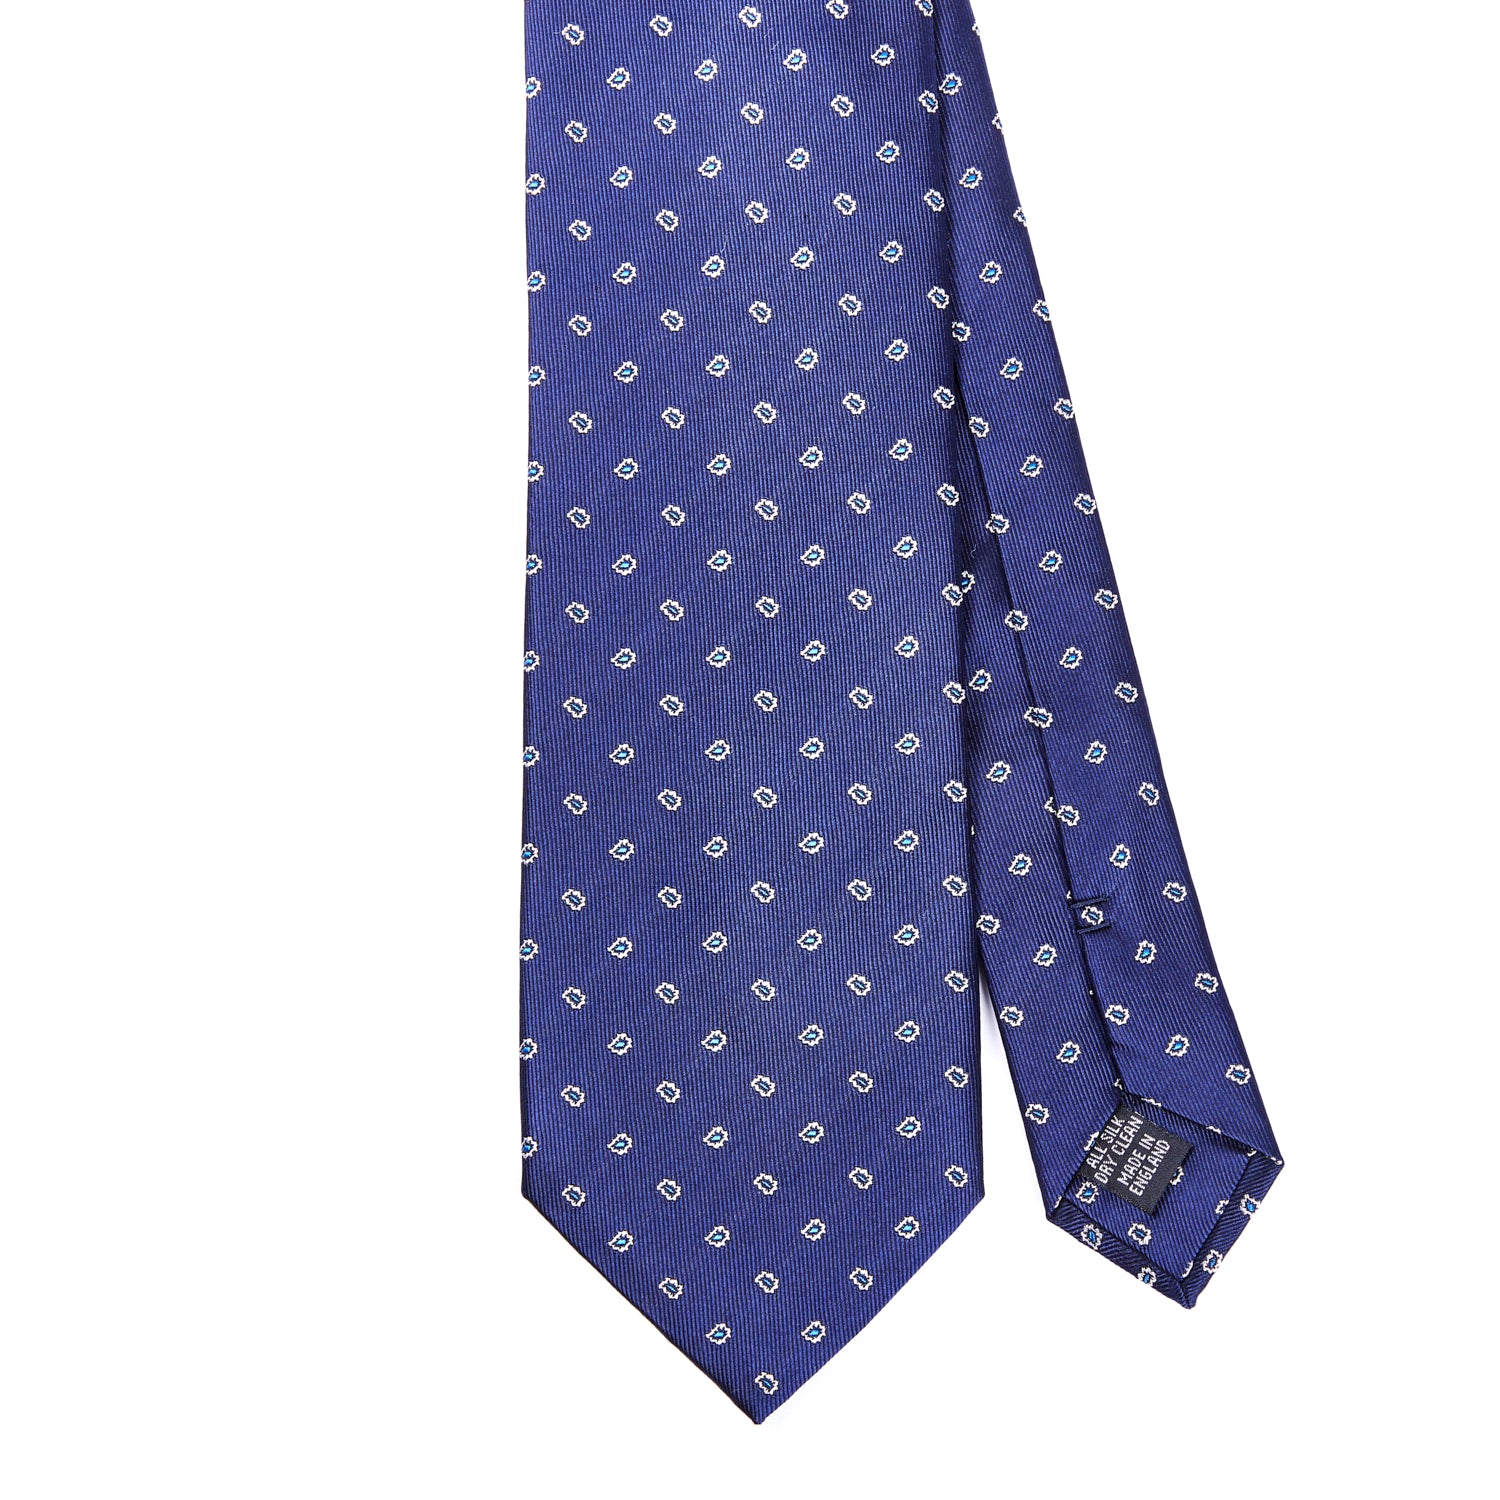 Handmade in the United Kingdom, the Sovereign Grade Navy Micro Paisley Jacquard Tie, 150 cm from KirbyAllison.com features white dots and is crafted with 100% English silk.